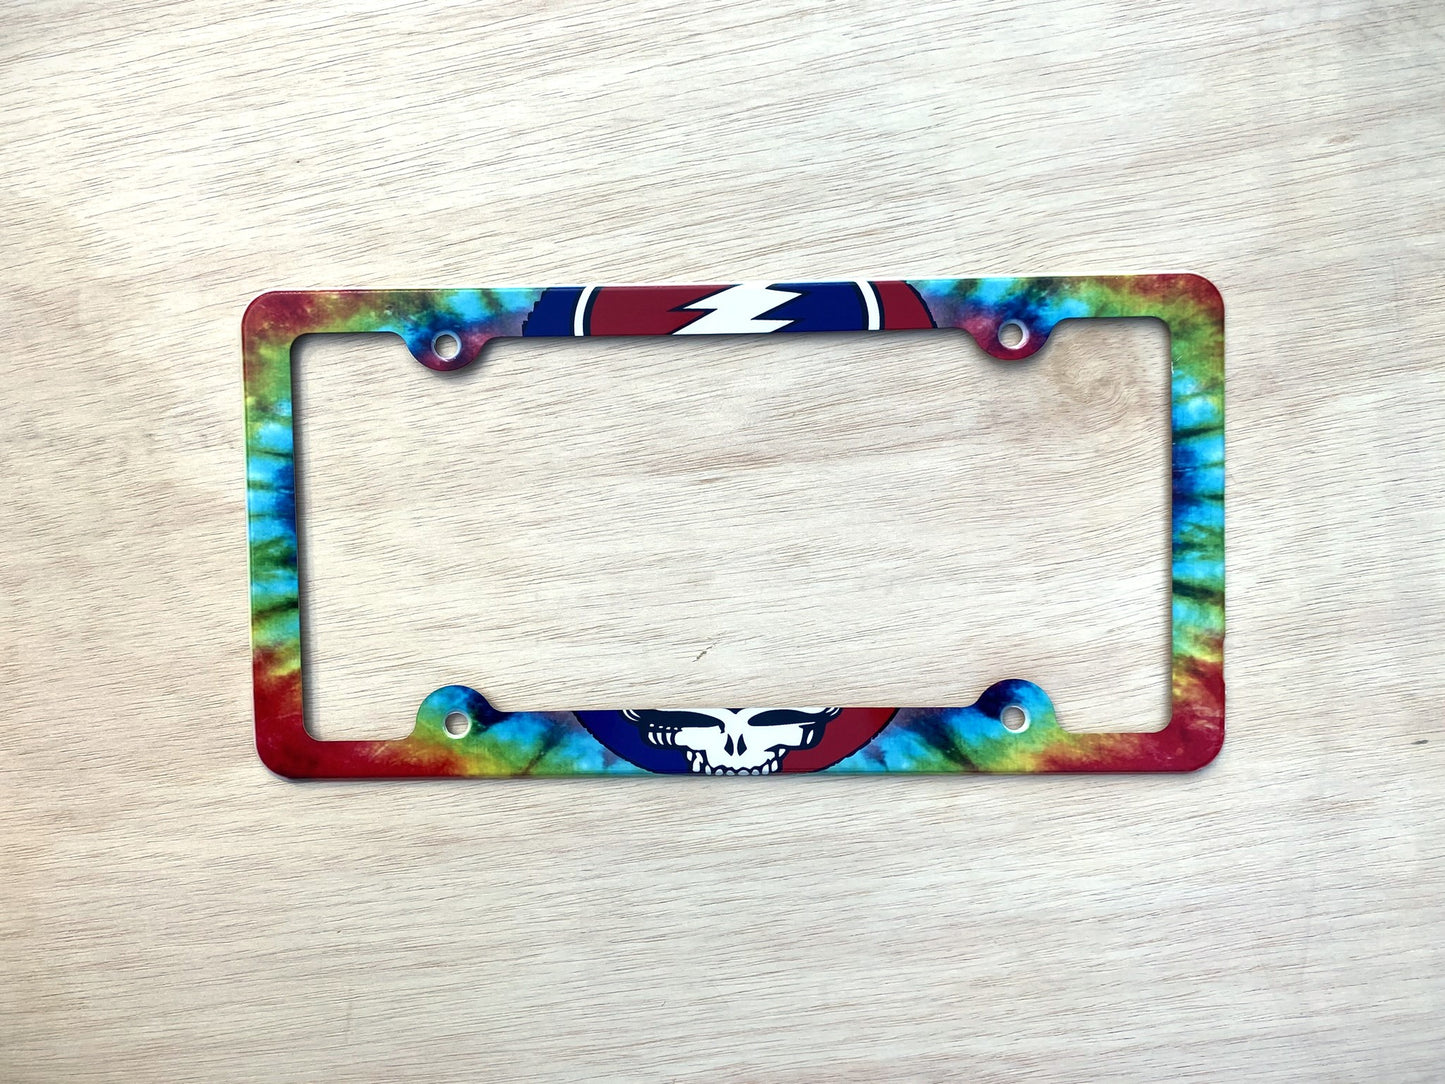 Steal your face License Plate Frame Decorative License Plate Holder tie dye Car Tag Frame